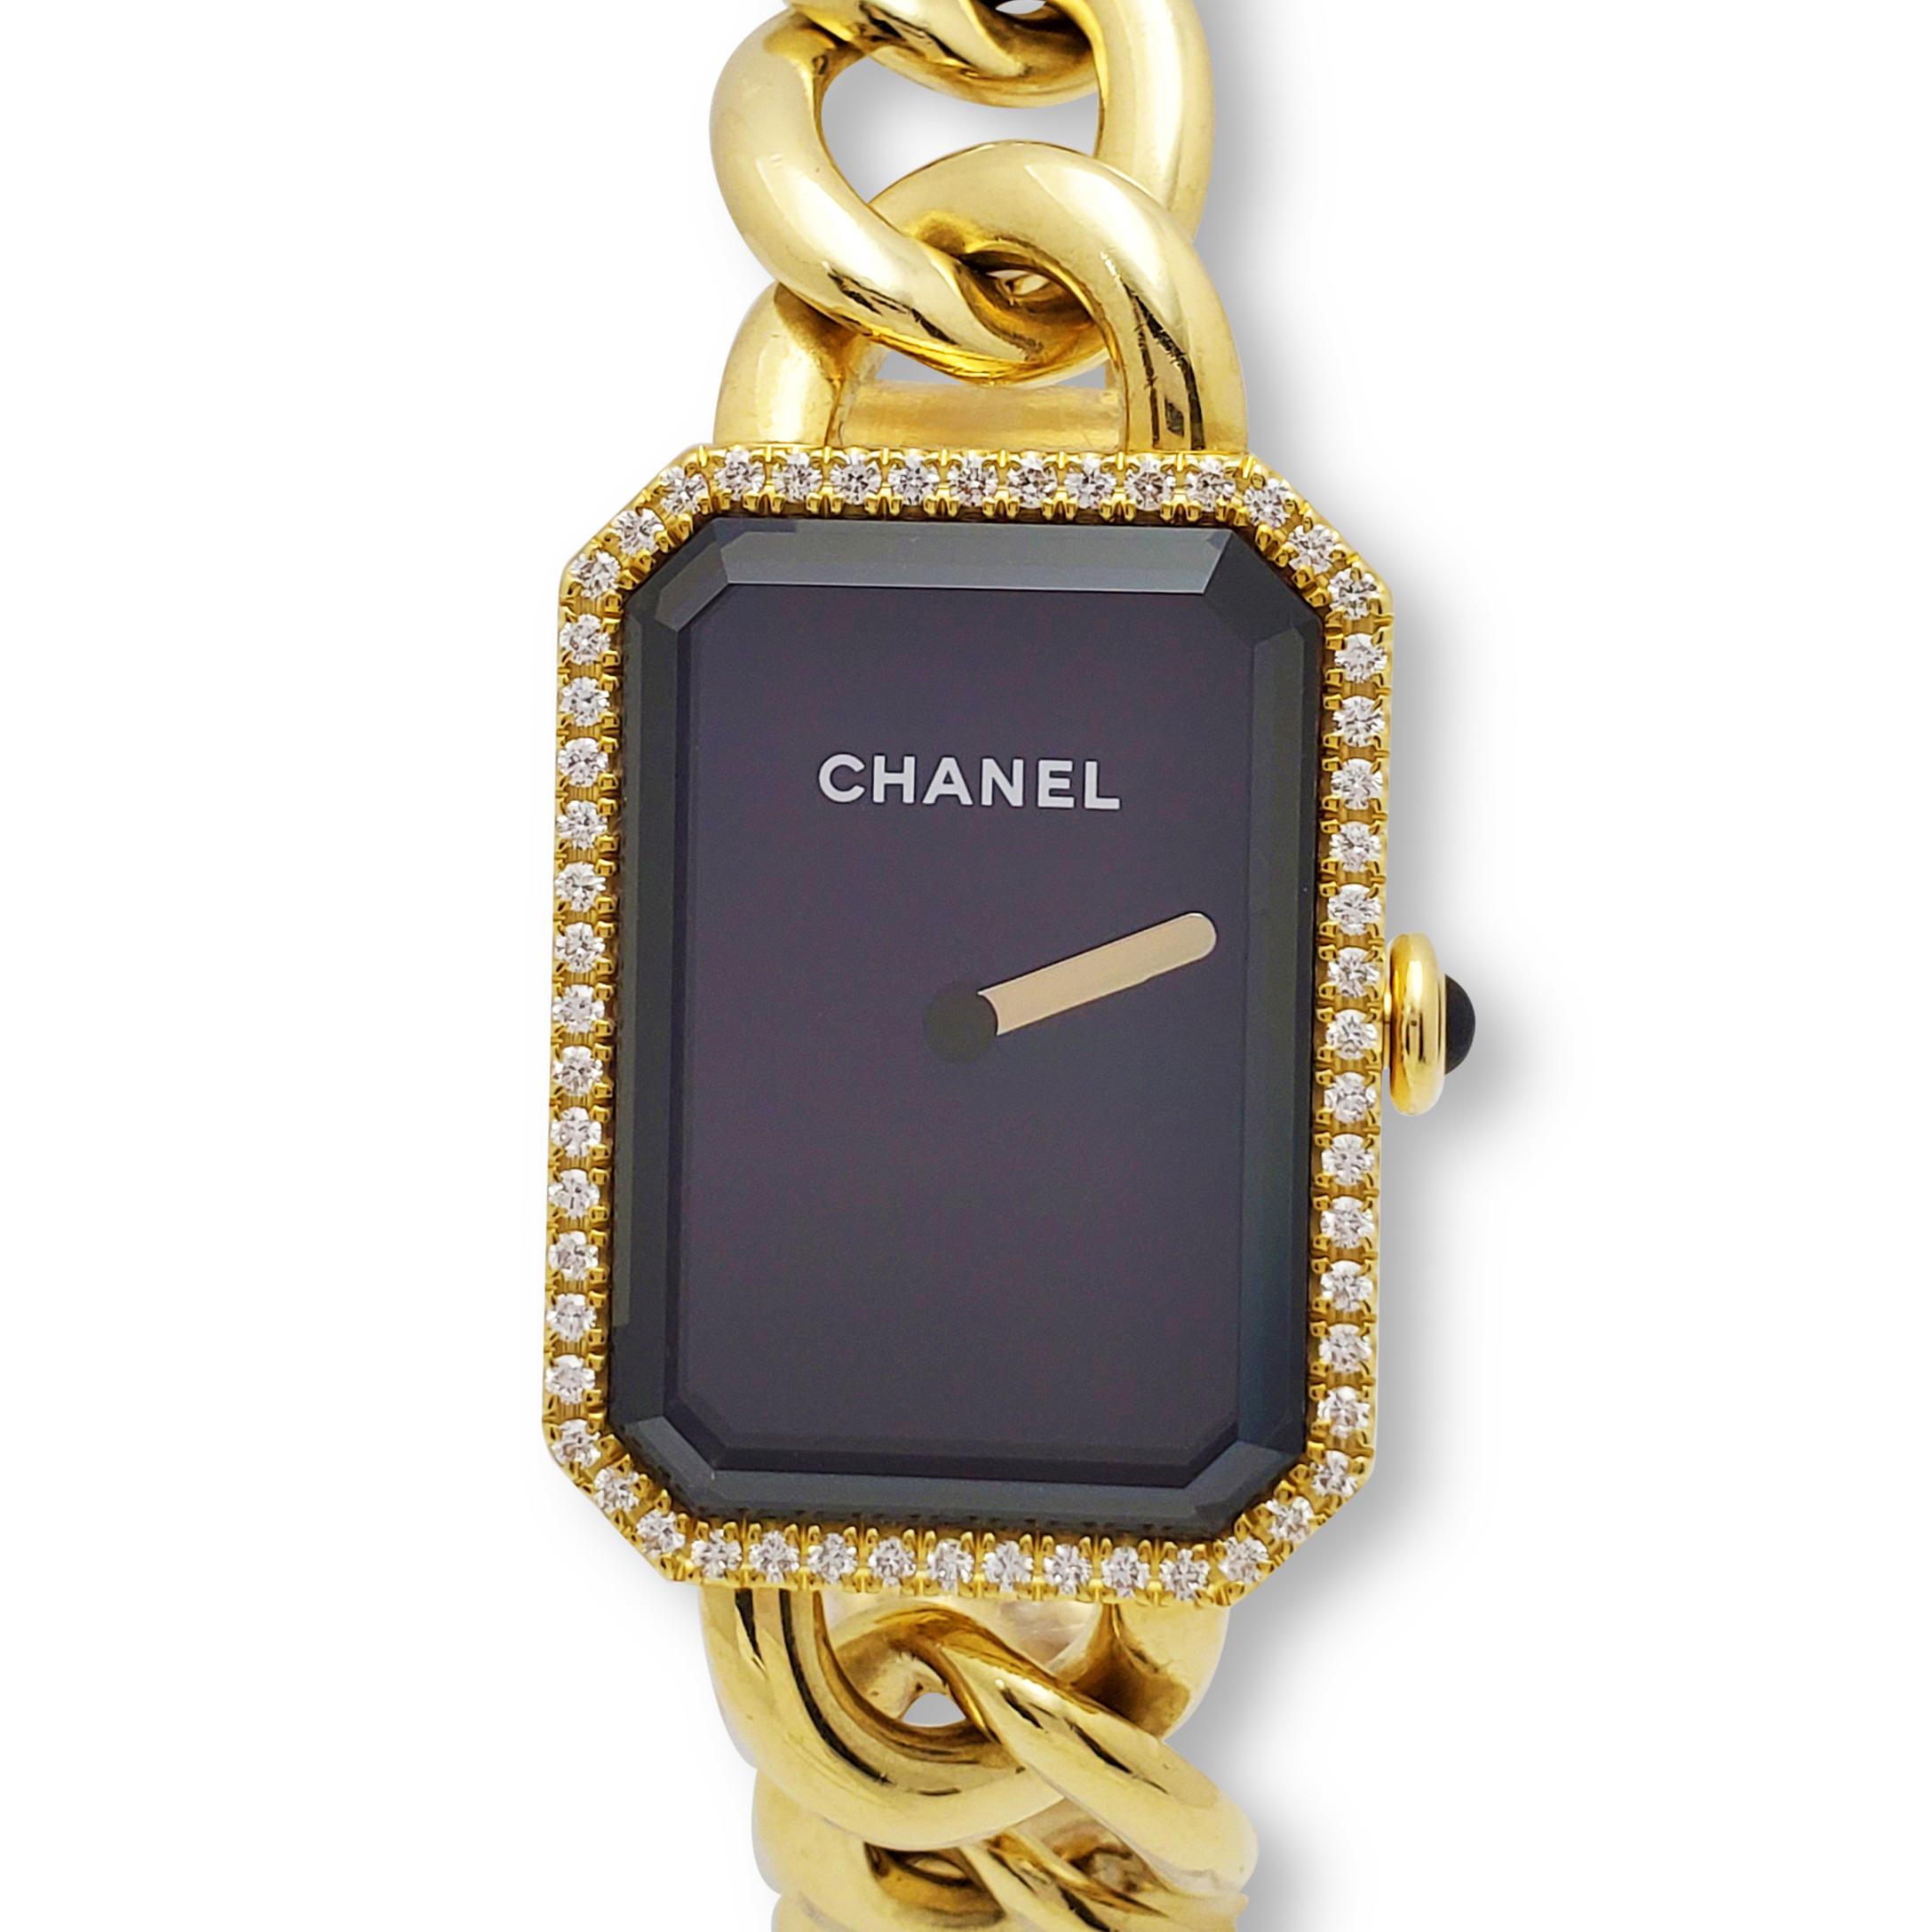 Authentic Chanel Première watch crafted in 18 karat yellow gold. 20mm x 28mm case, 18 karat yellow gold chain bracelet, black lacquered dial, diamond set bezel and onyx cabochon crown.  Swiss Quartz movement.  Will fit up to a 7 inch wrist.  Watch